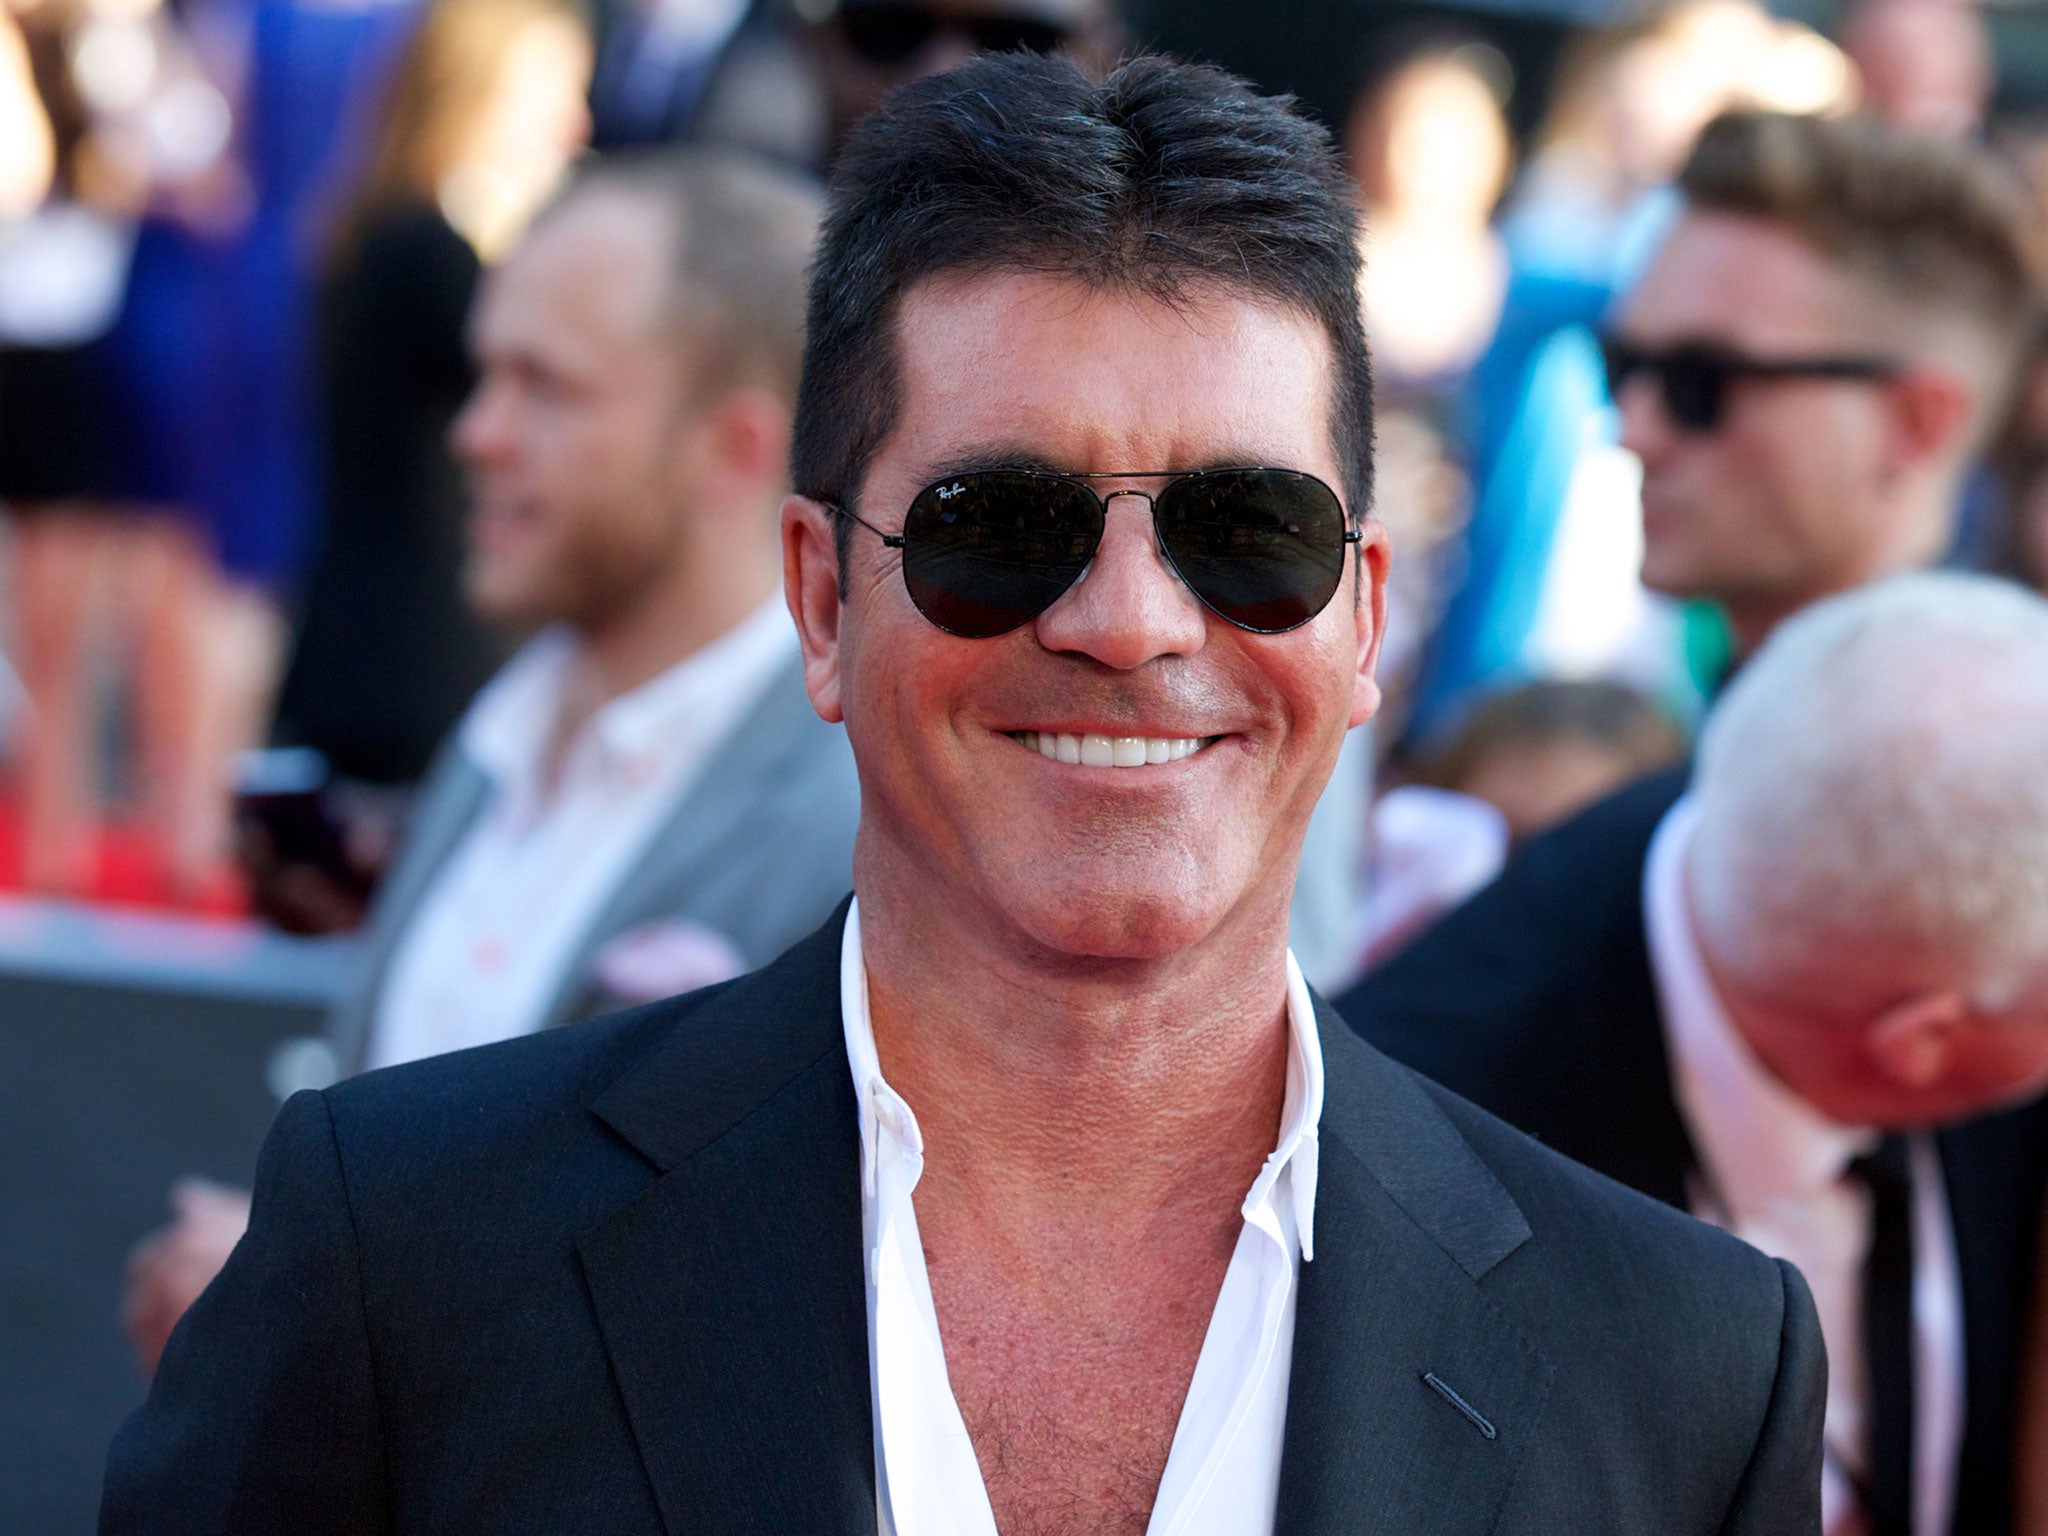 British music and television producer Simon Cowell